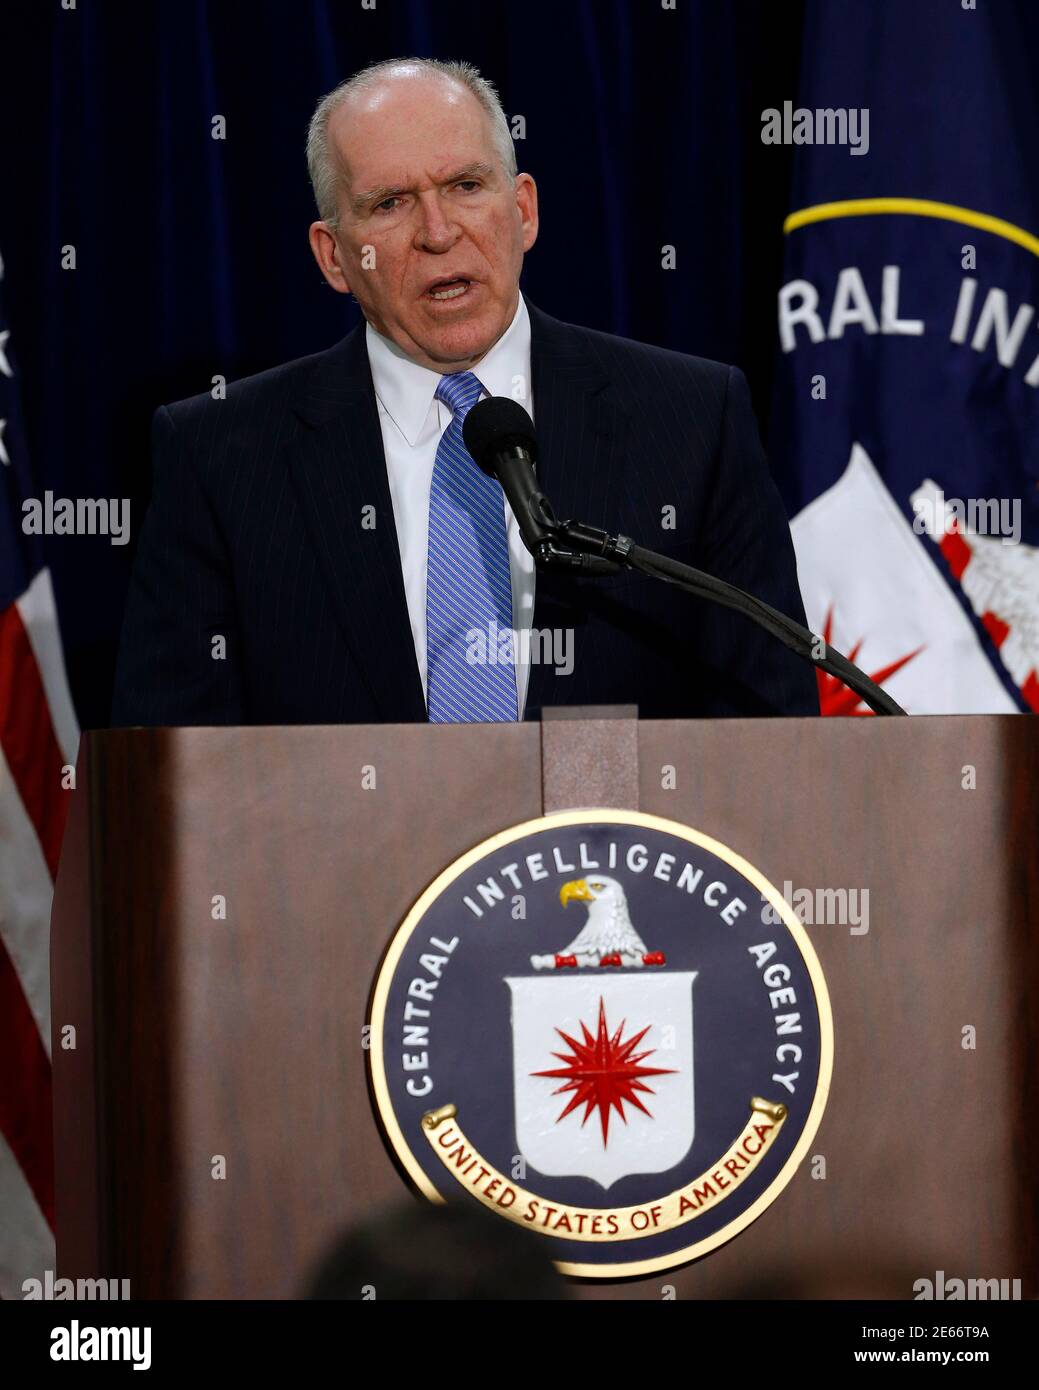 Director of the Central Intelligence Agency (CIA) John Brennan answers  questions from the press during a rare news conference at CIA Headquarters  in Virginia, December 11, 2014. Brennan said on Thursday that